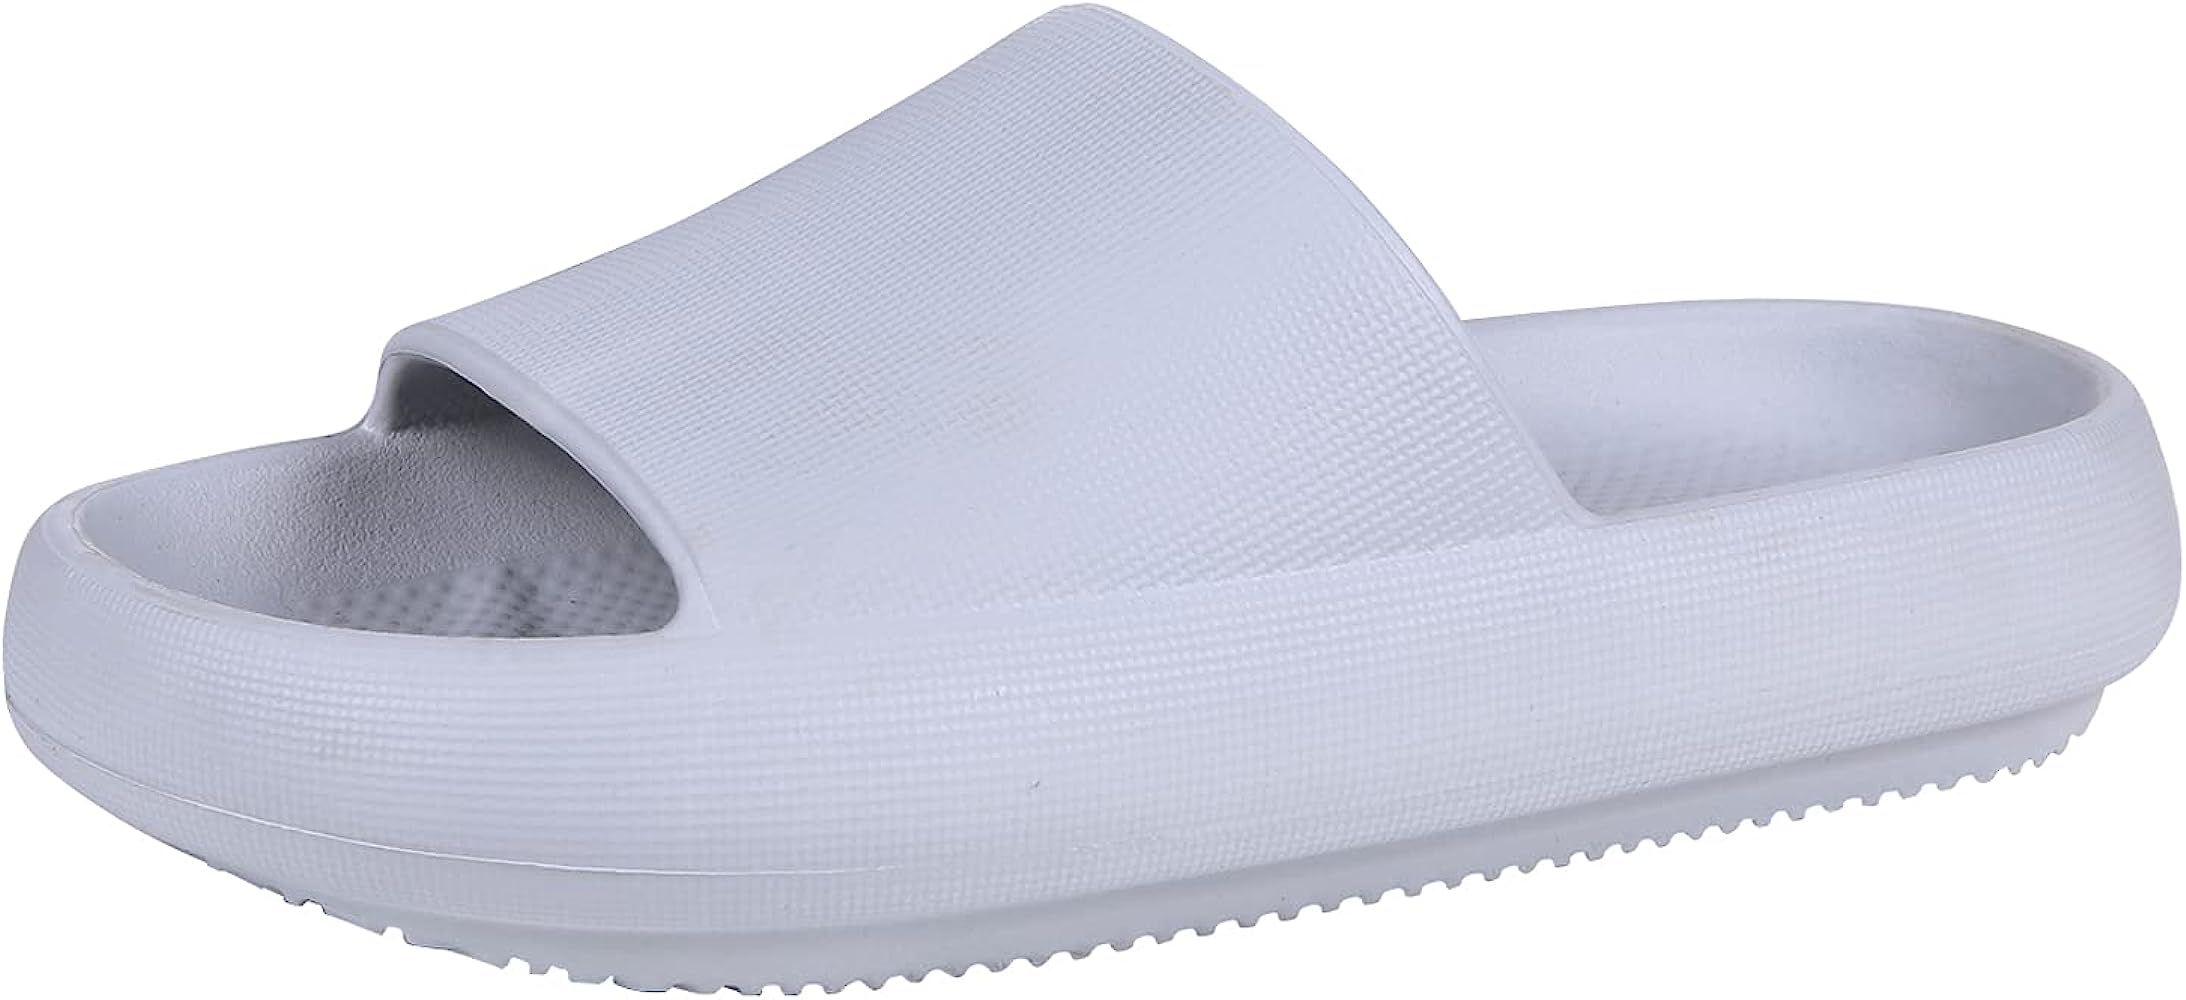 Pillow Slides Shower Sandal Slippers Quick Drying Bathroom Slippers Shoes Recovery Cloud Slides C... | Amazon (US)